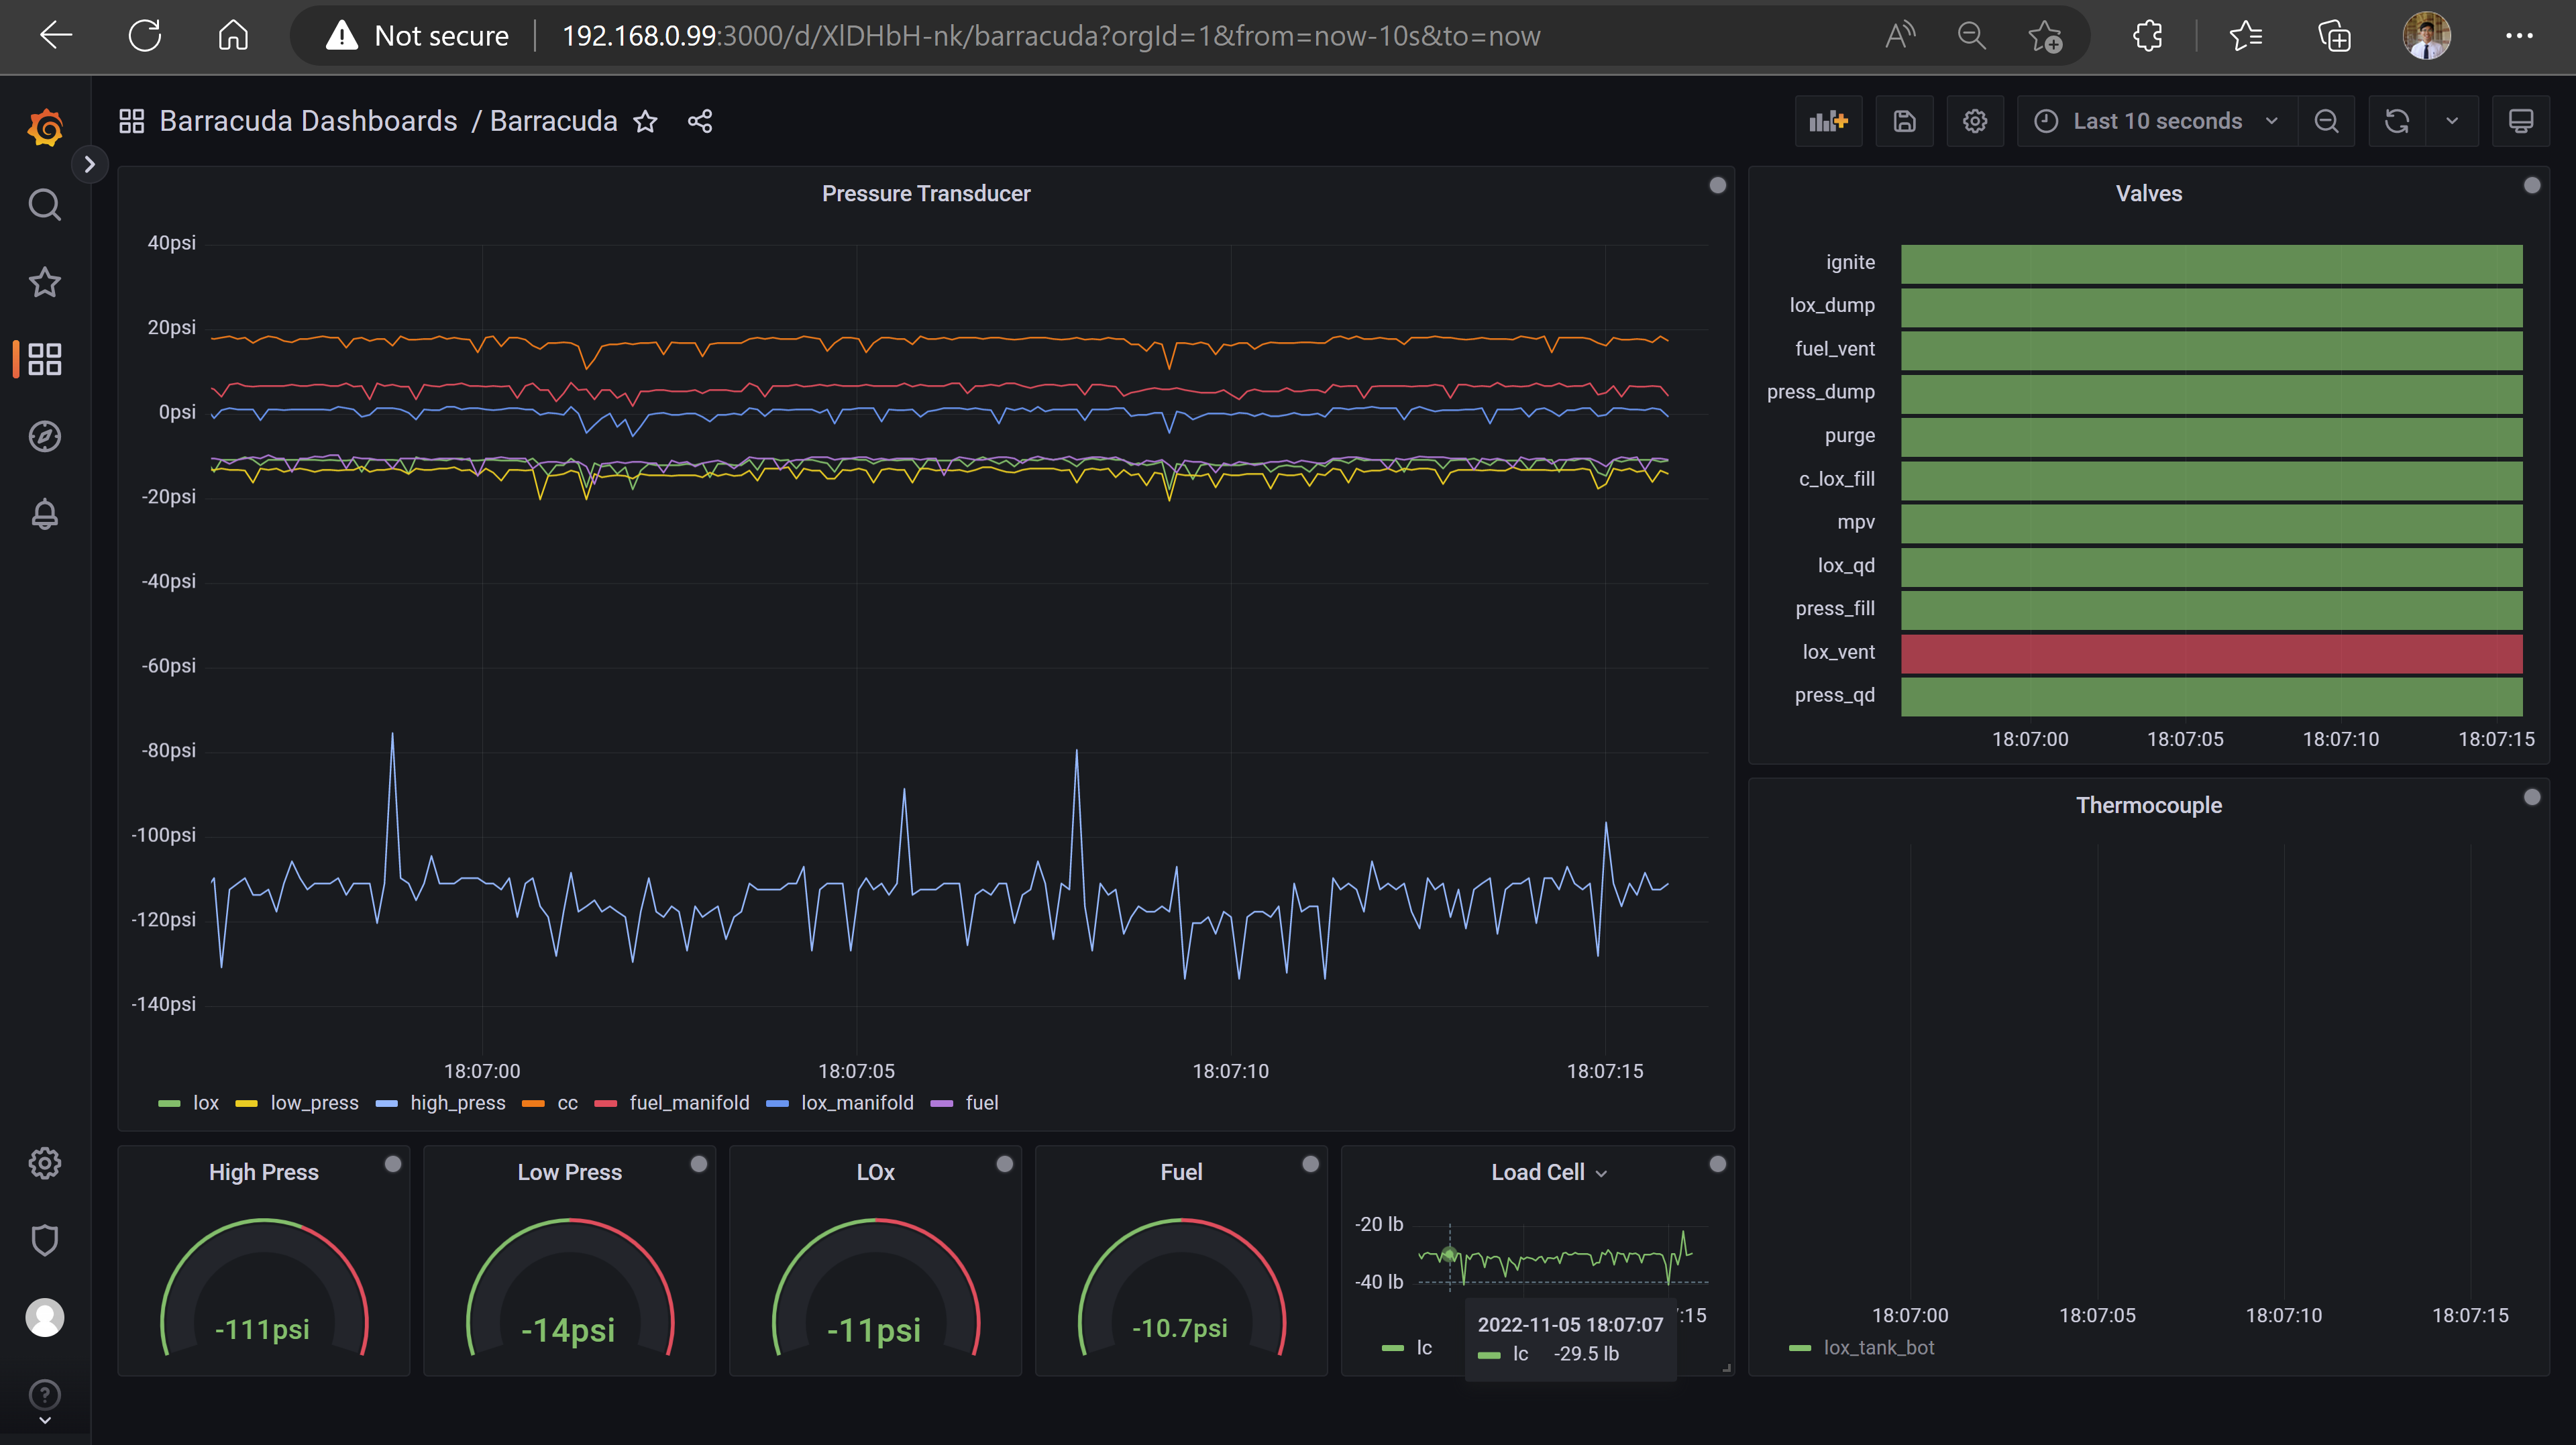 The Grafana dashboard for the college rocket team.